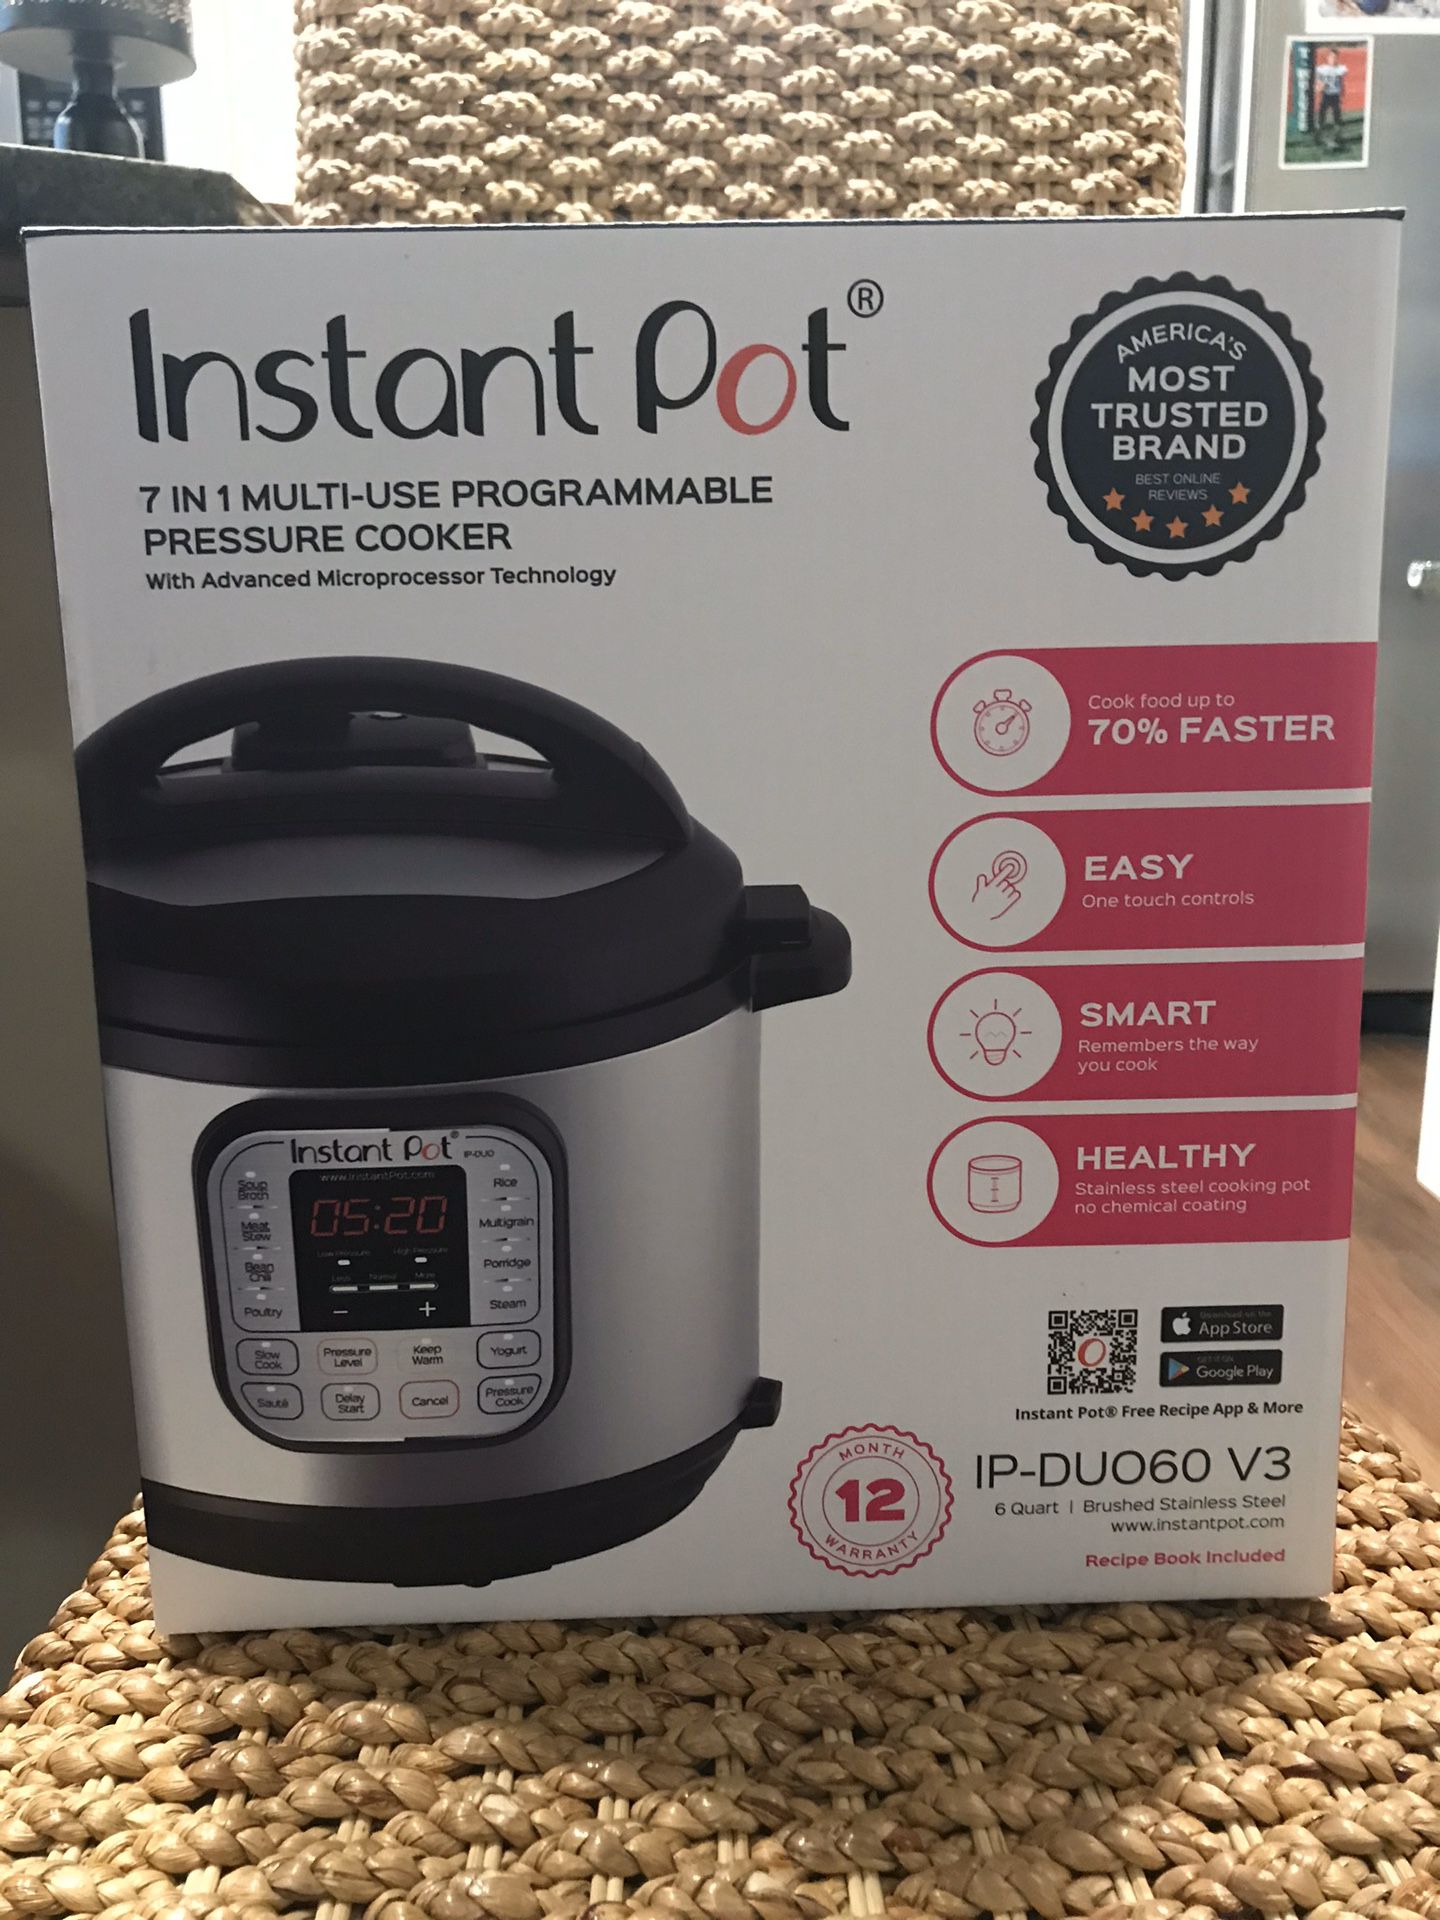 Instant Pot 6 quart 7 In 1 Multi Programmable with Advanced Microprocessor